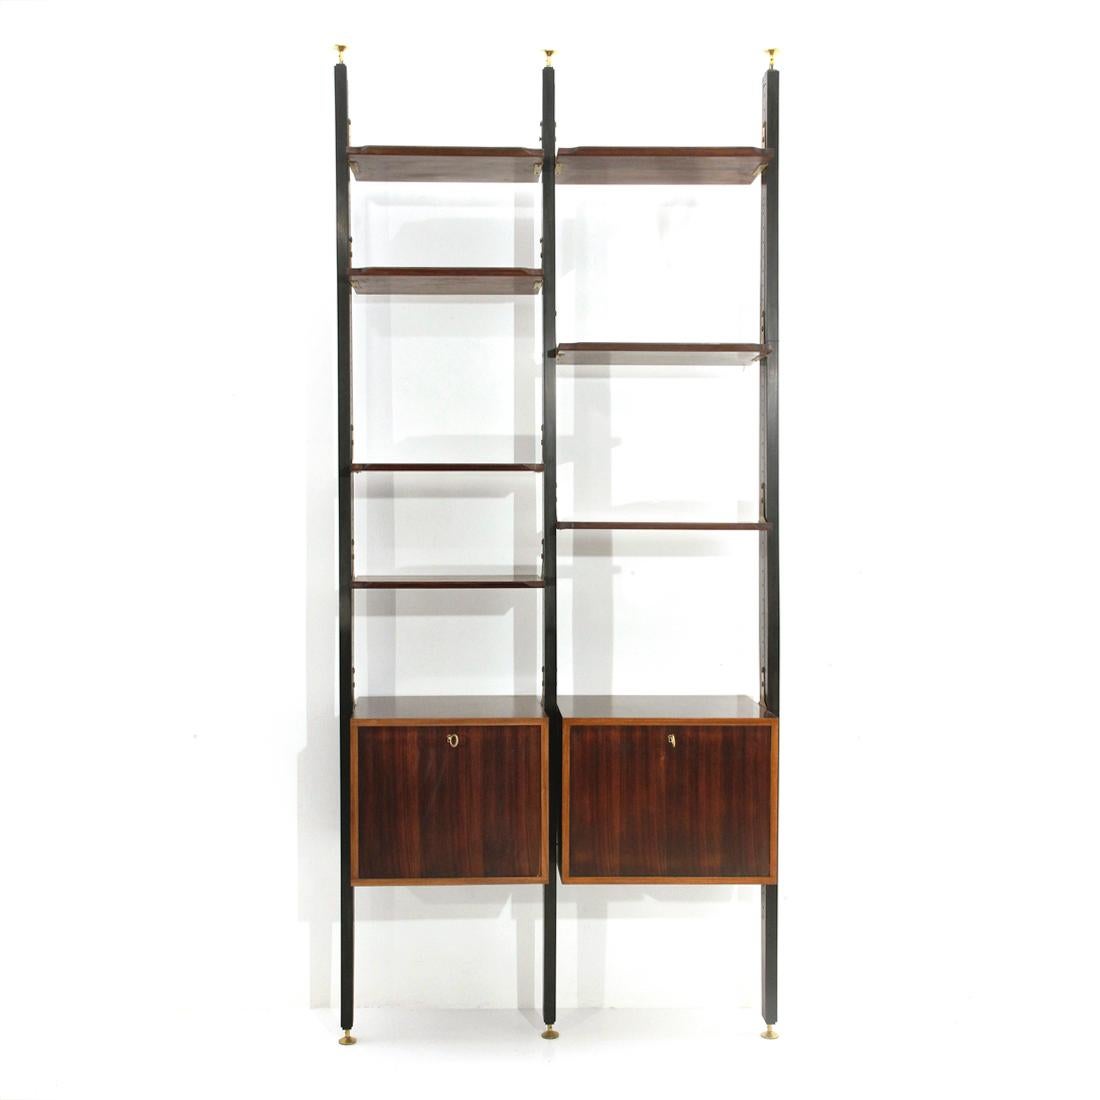 Italian manufacture bookcase produced in the 1950s
Uprights in black painted wood with brass terminals adjustable in height.
Storage compartments and shelves in veneered wood.
Shelves with tapered edge.
Storage compartments with flap opening,